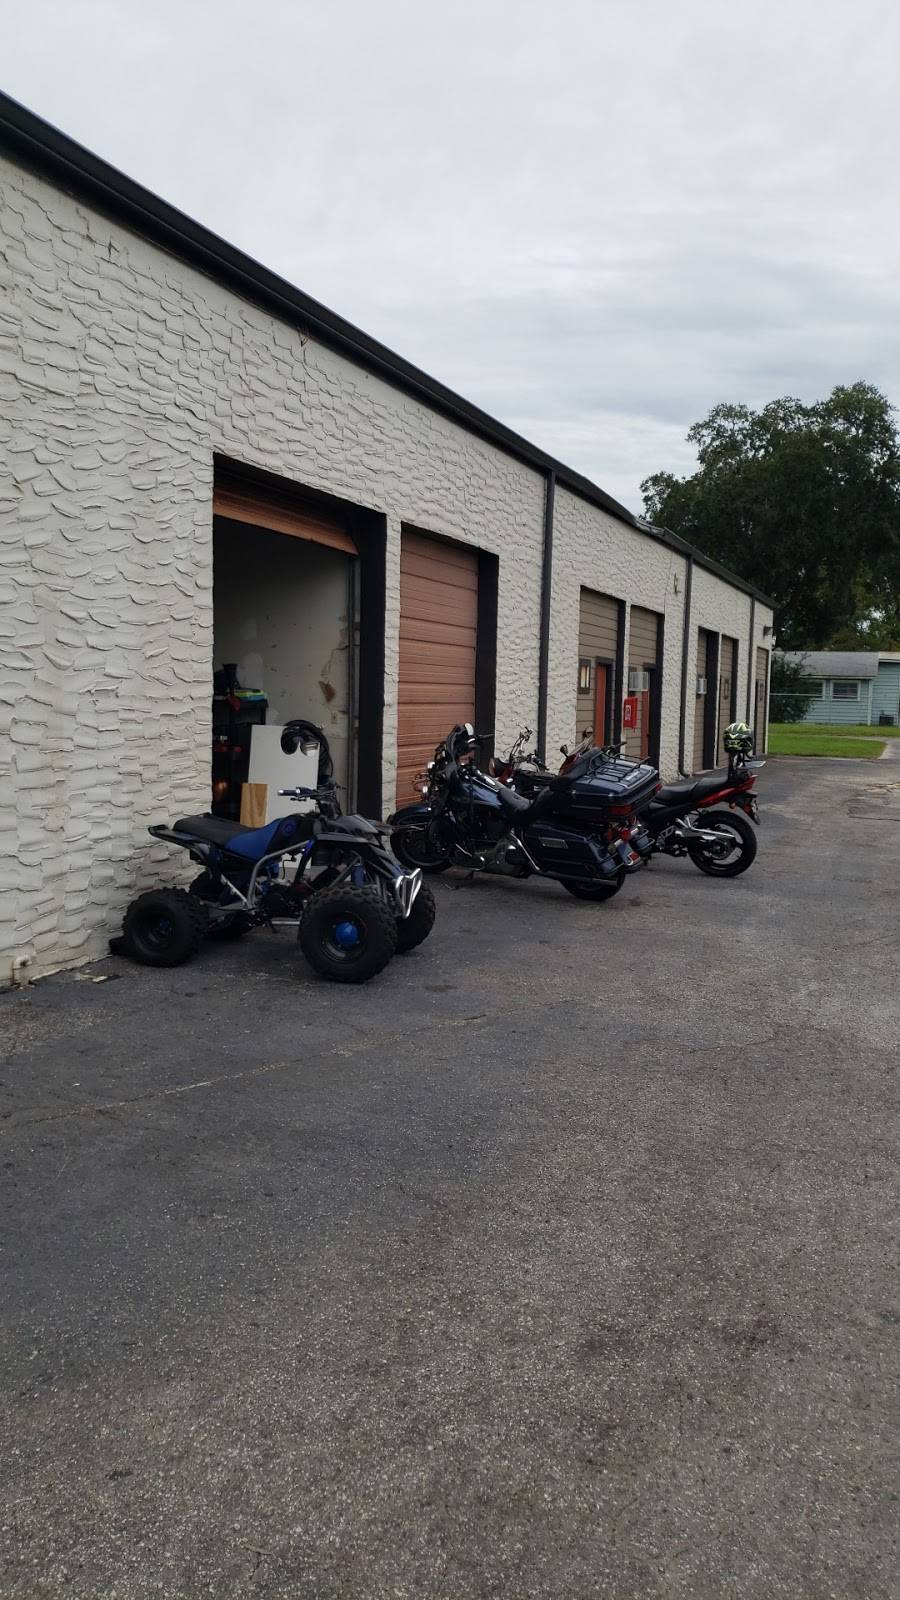 Cmt Cycles | 2345 Edgewood Ave N, Jacksonville, FL 32254, USA | Phone: (904) 554-2041